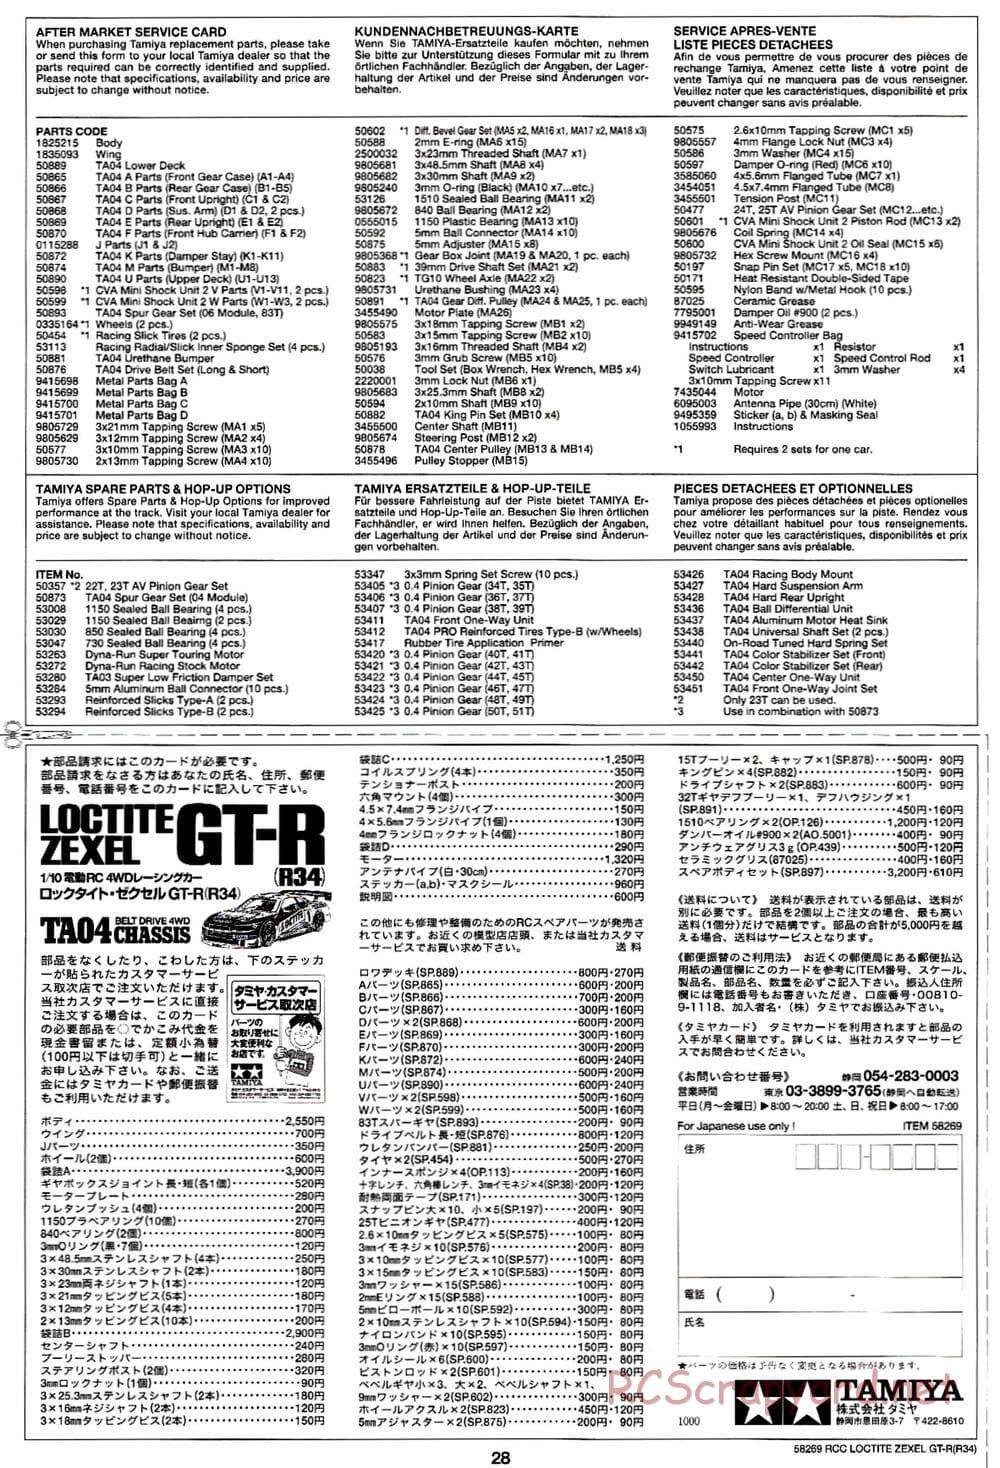 Tamiya - Loctite Zexel Skyline GT-R (R34) - TA-04 Chassis - Manual - Page 28